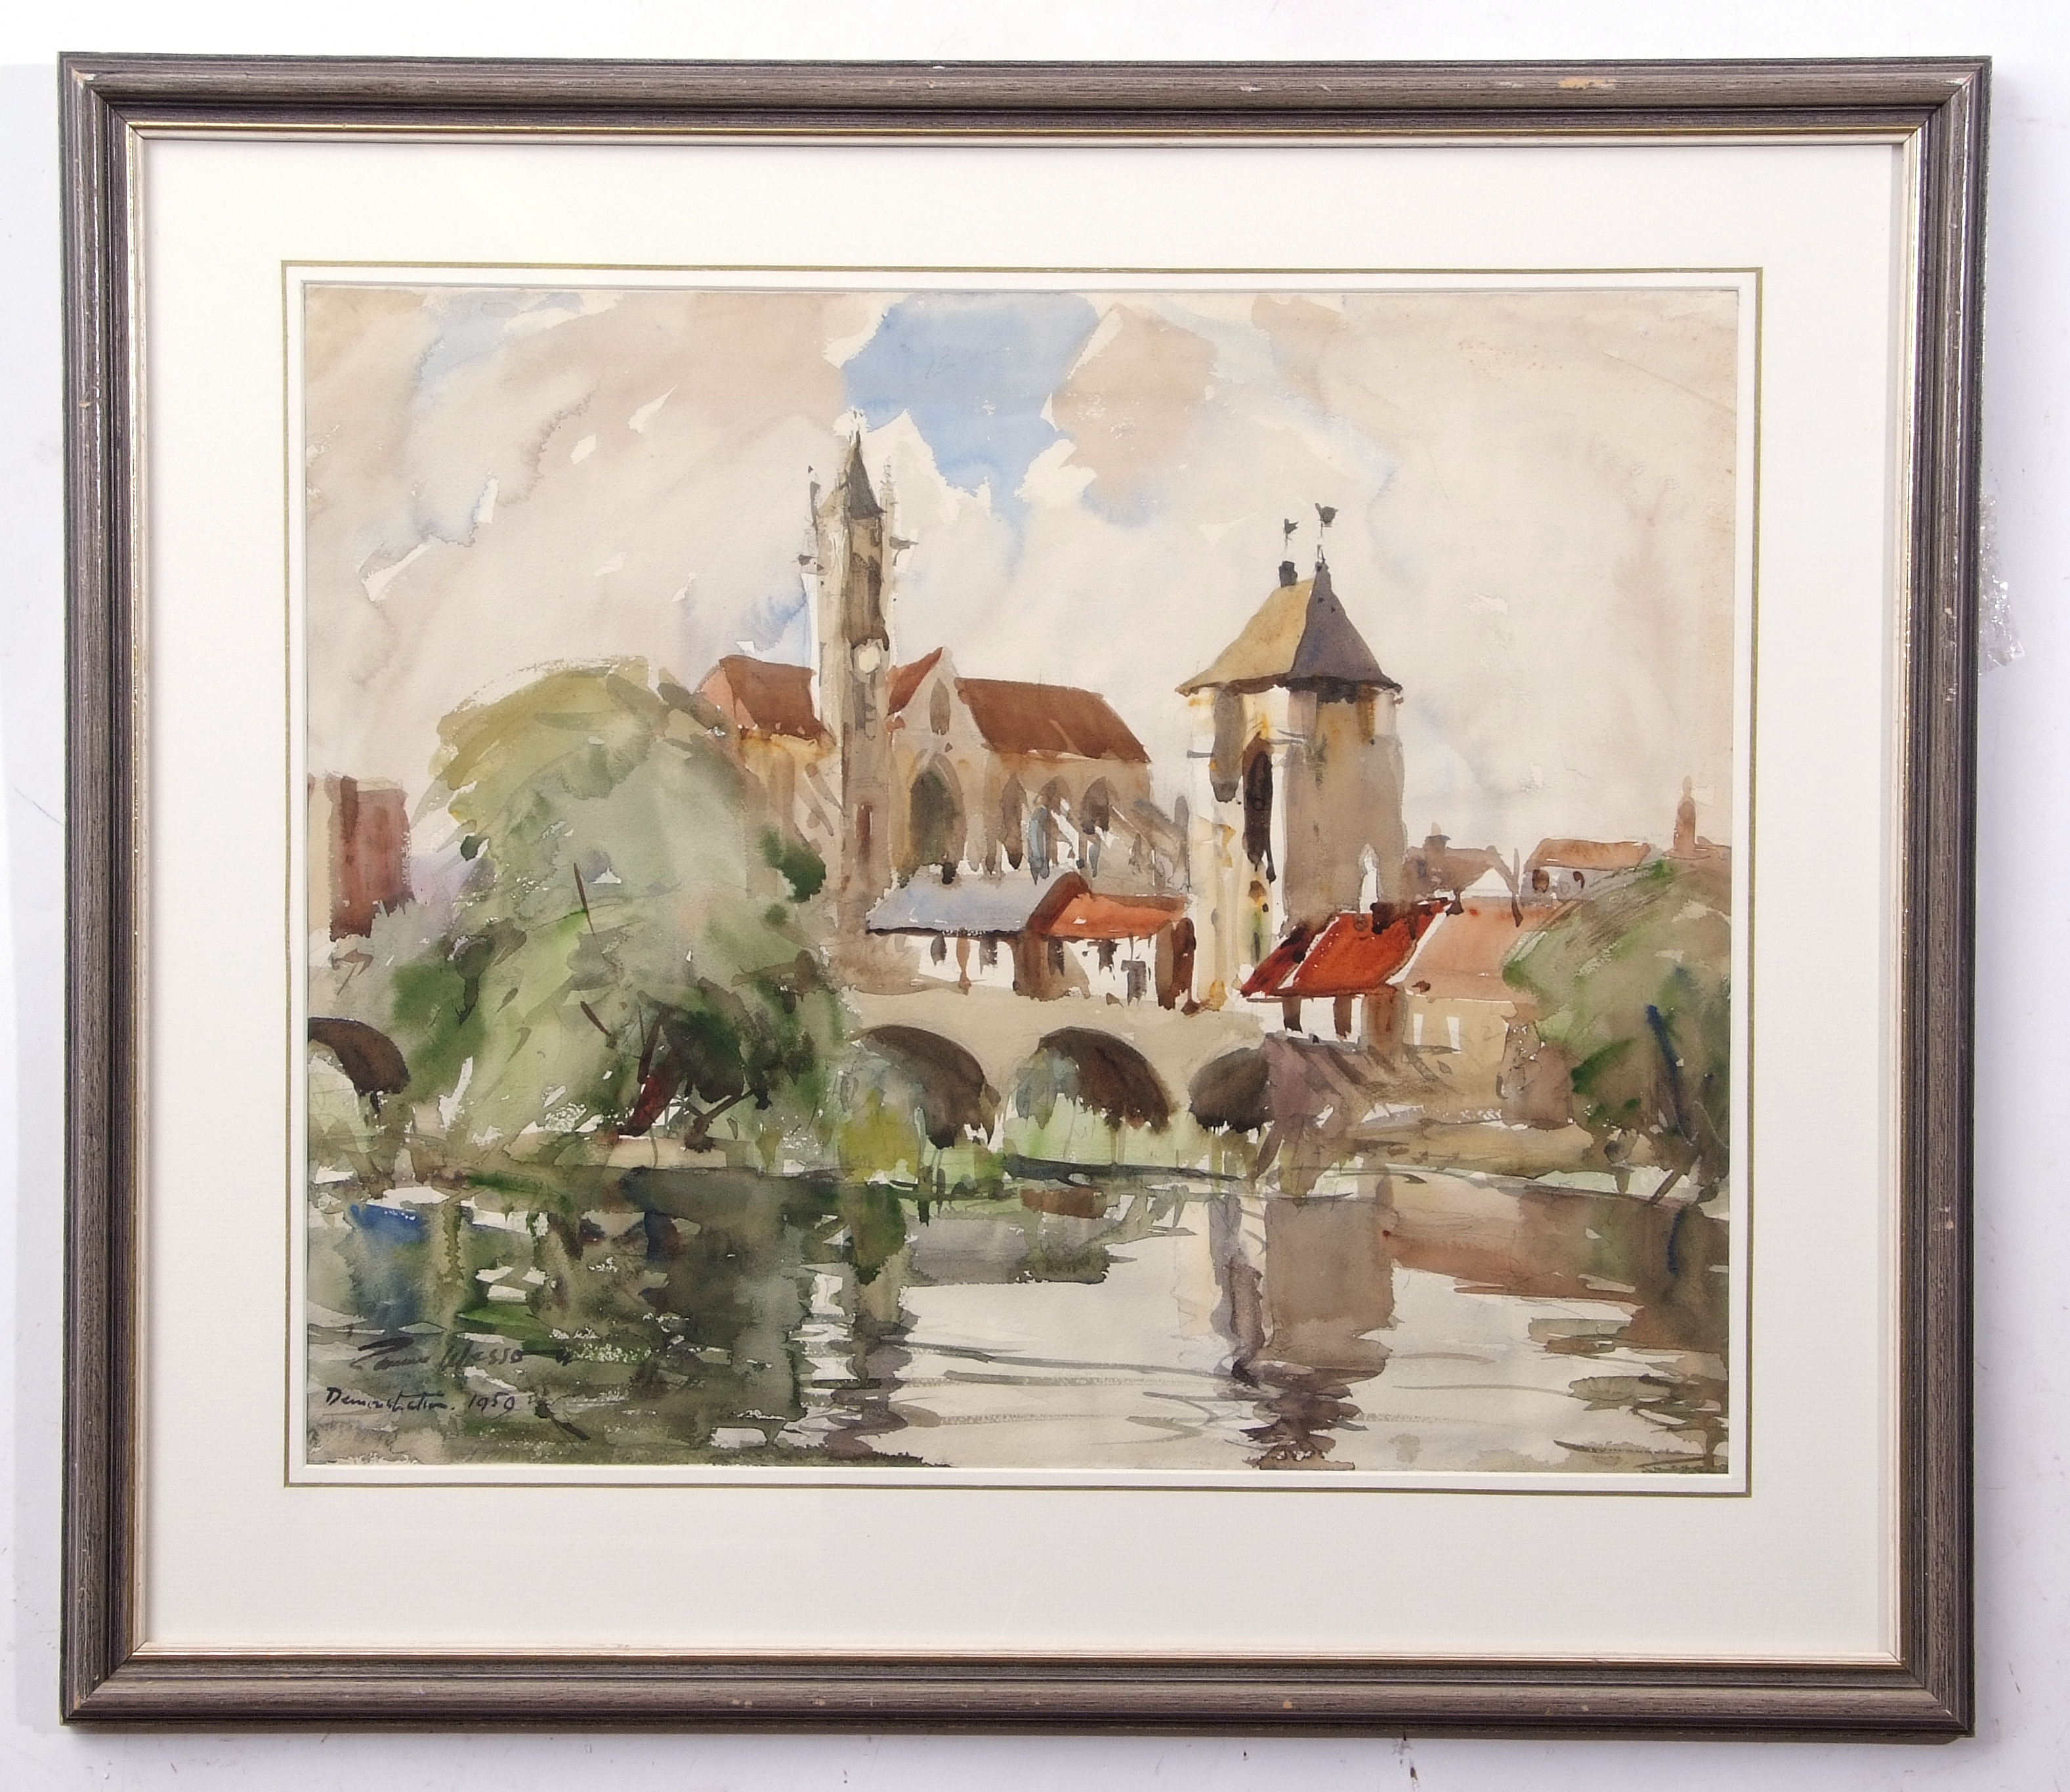 AR Edward Wesson, RI, RBA (1910-1983), "Moret-Sur-Loing, France", watercolour, signed and dated 1950 - Image 2 of 2